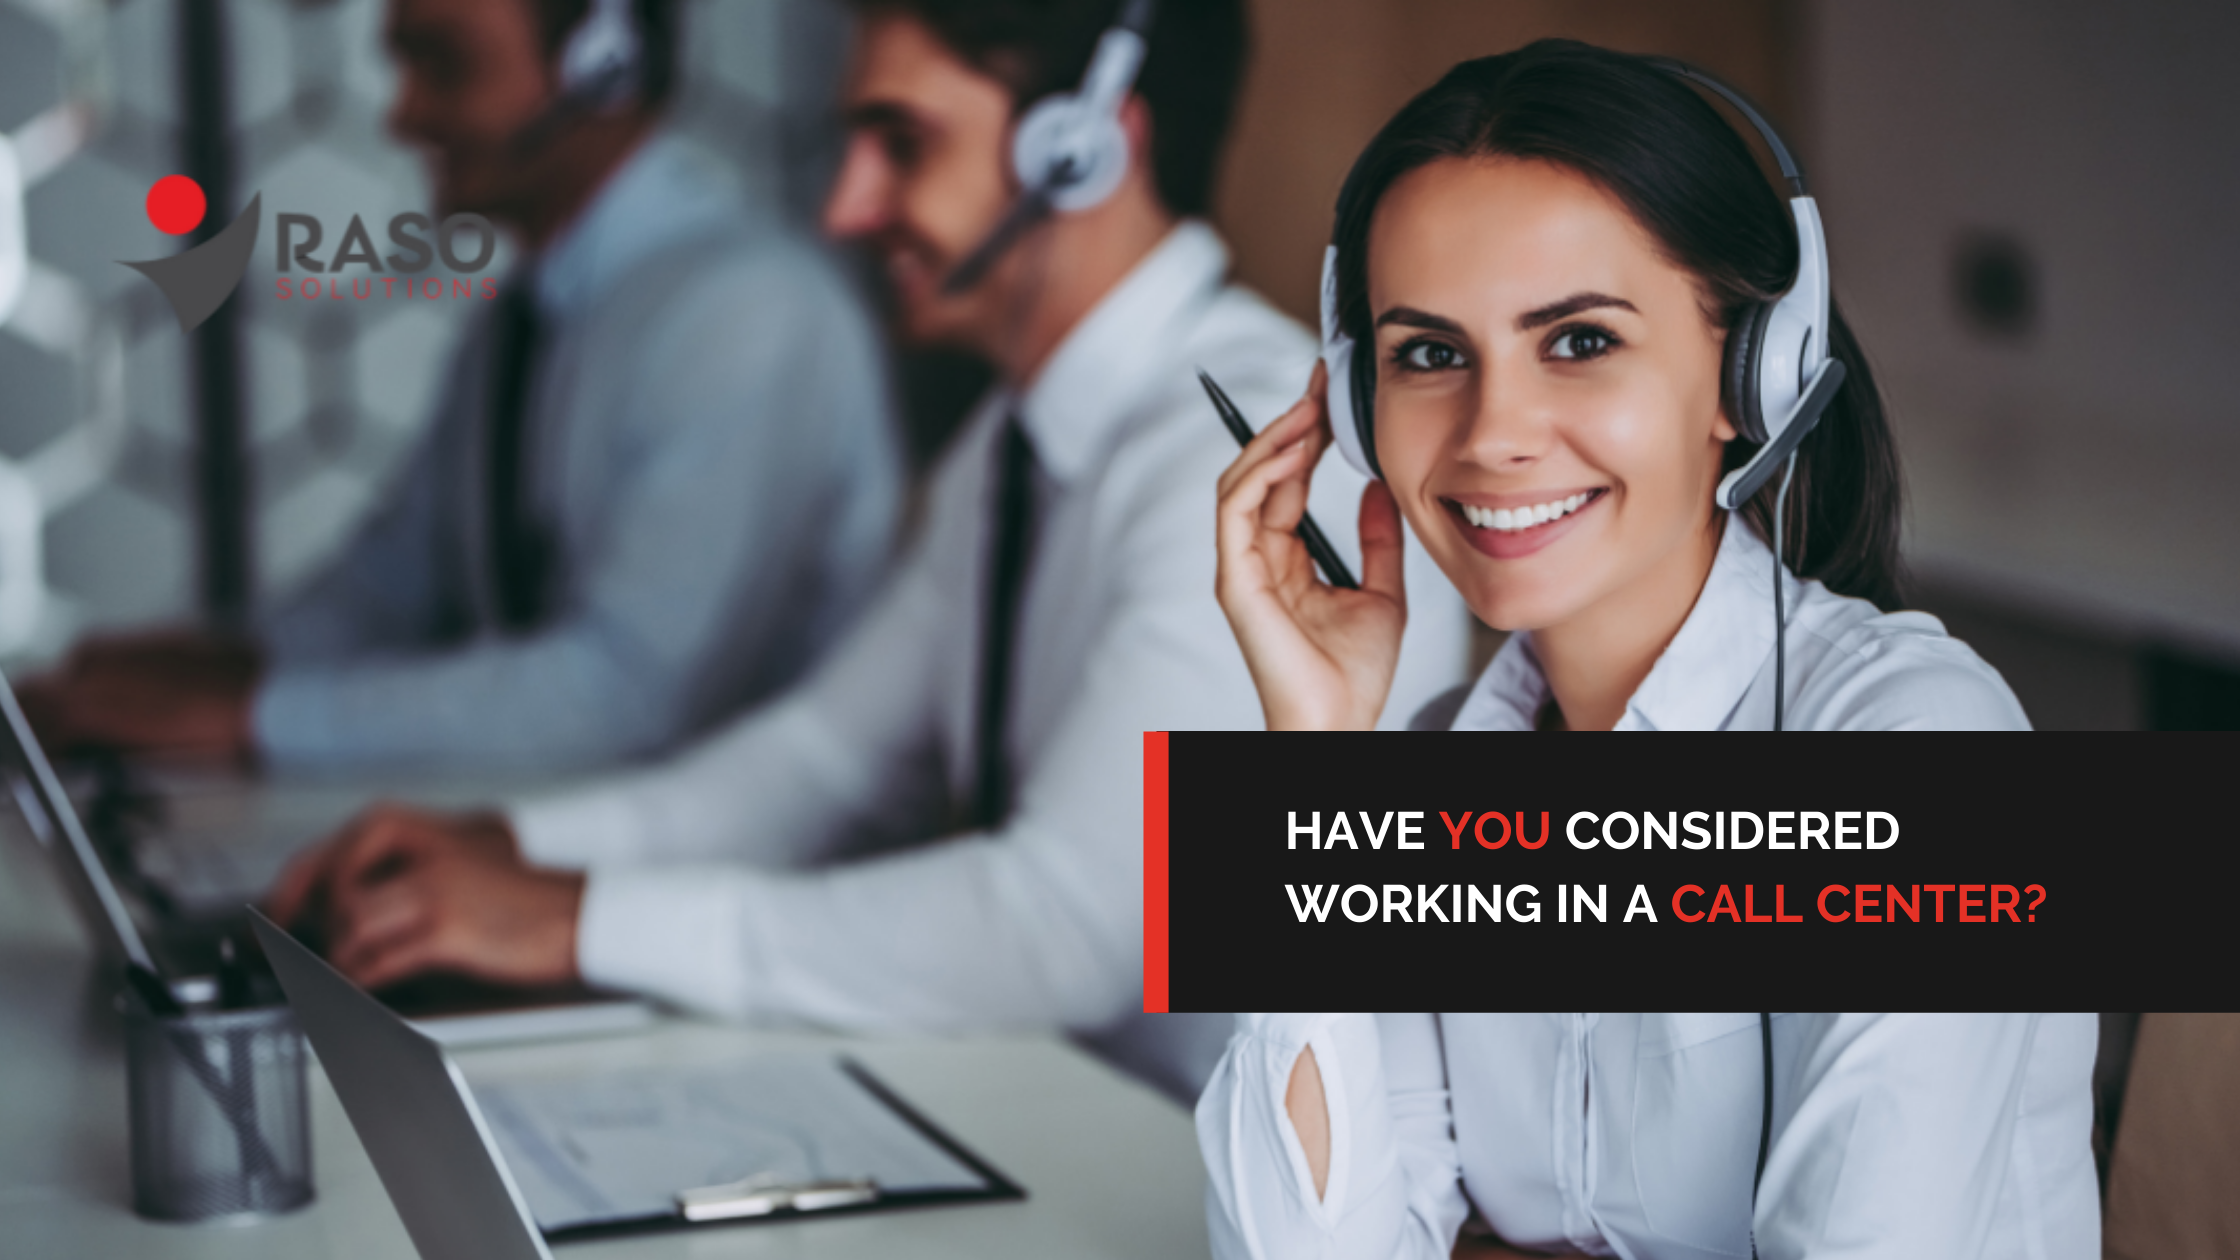 Have You Considered Working in a Call Center?